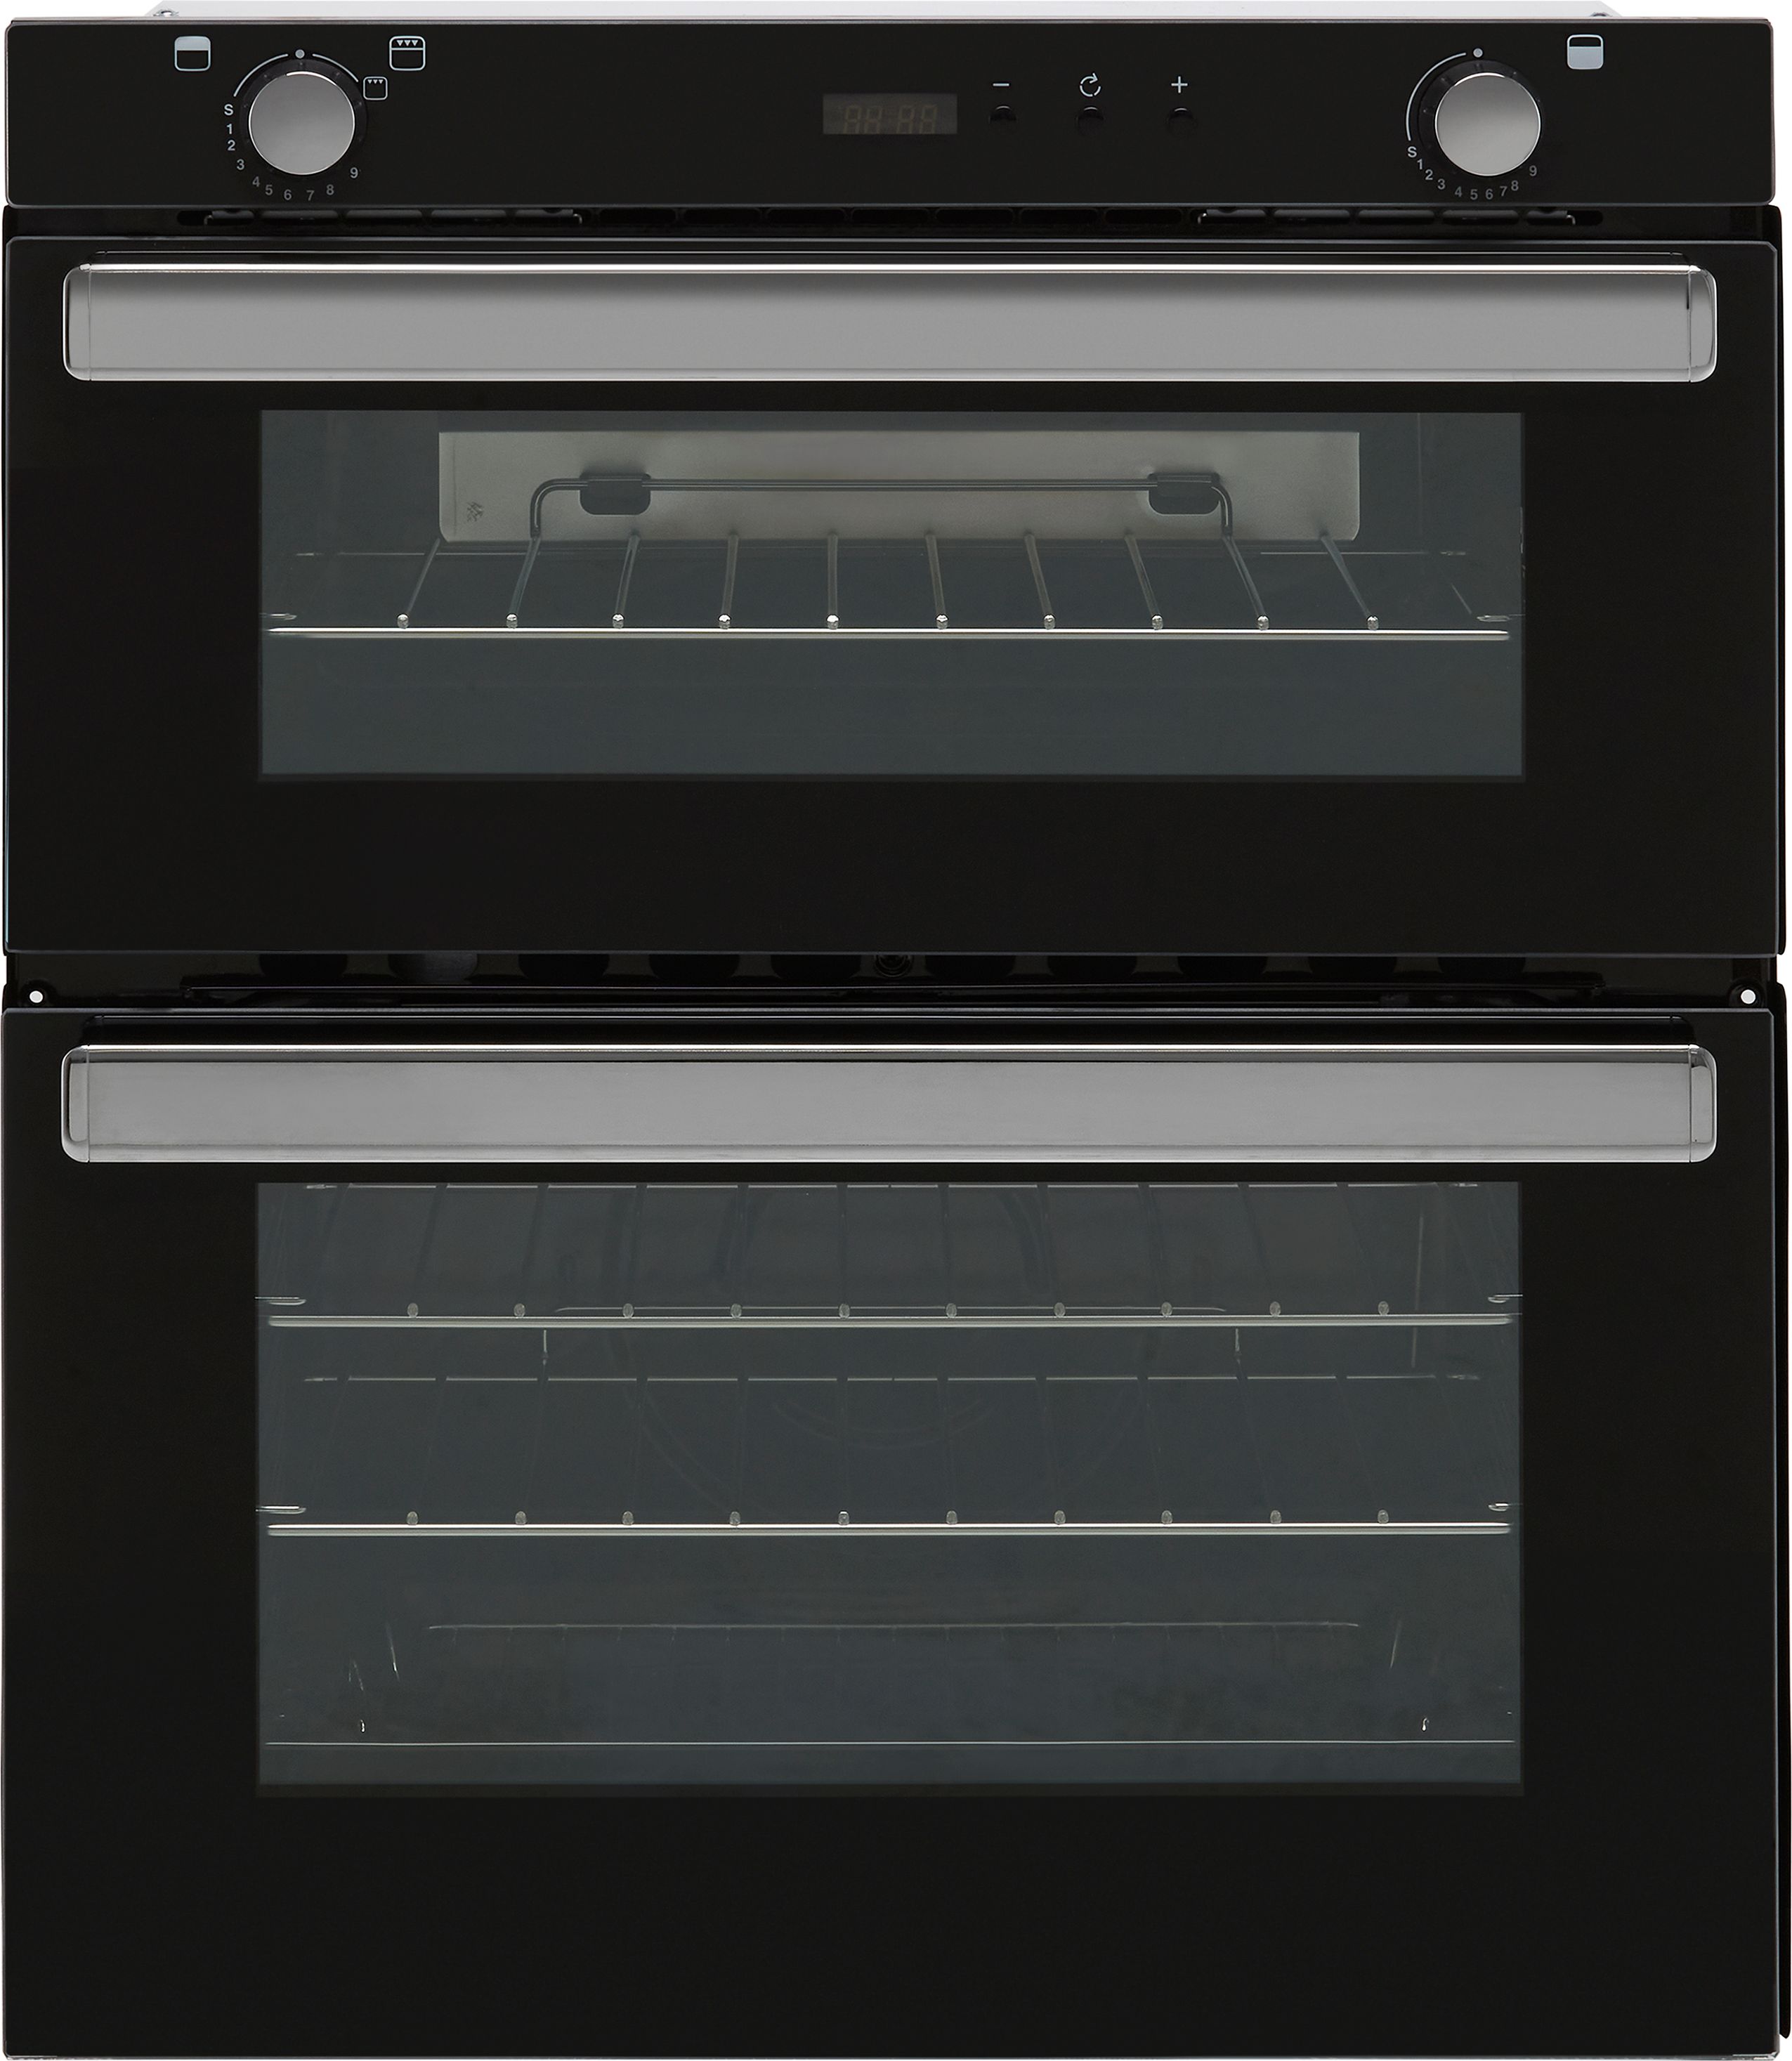 Belling BI702G Built Under Gas Double Oven with Full Width Electric Grill - Black - A/A Rated, Black